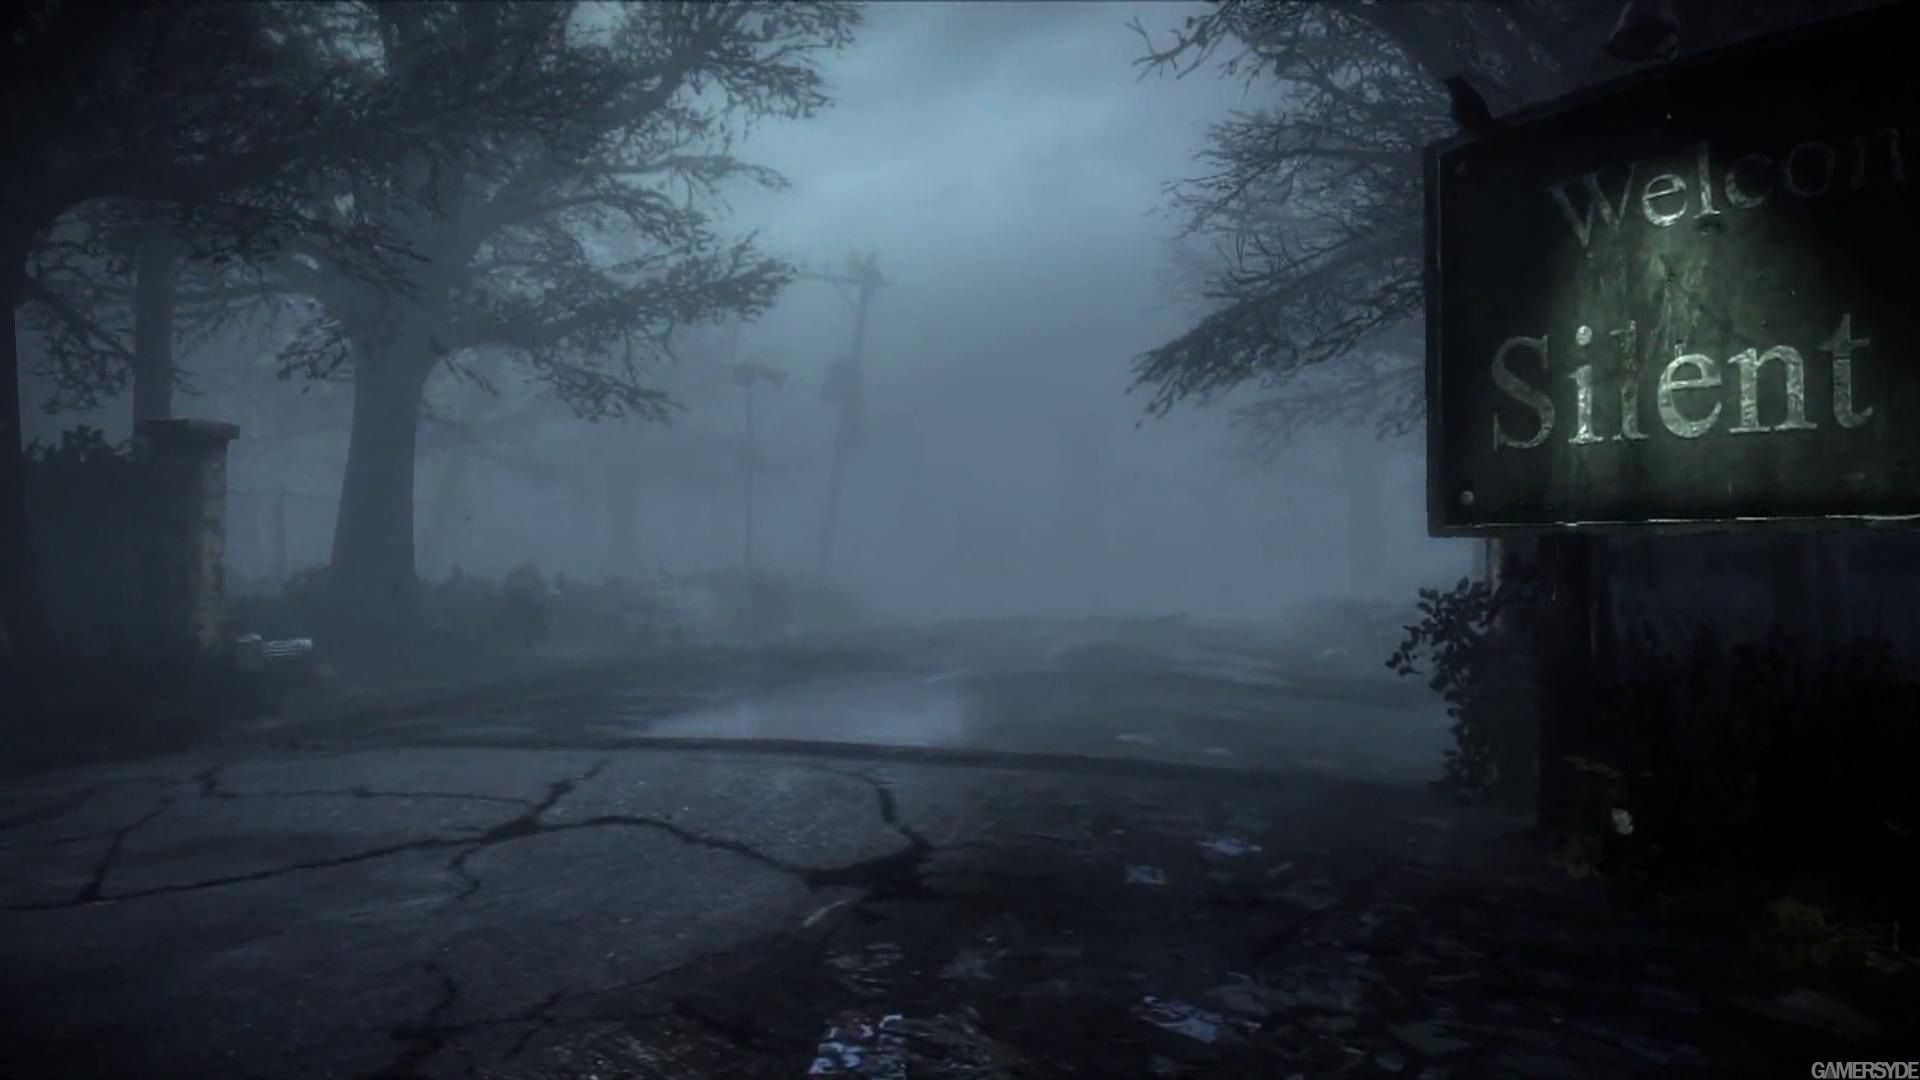 Silent Hill: Homecoming, Game, Wallpaper